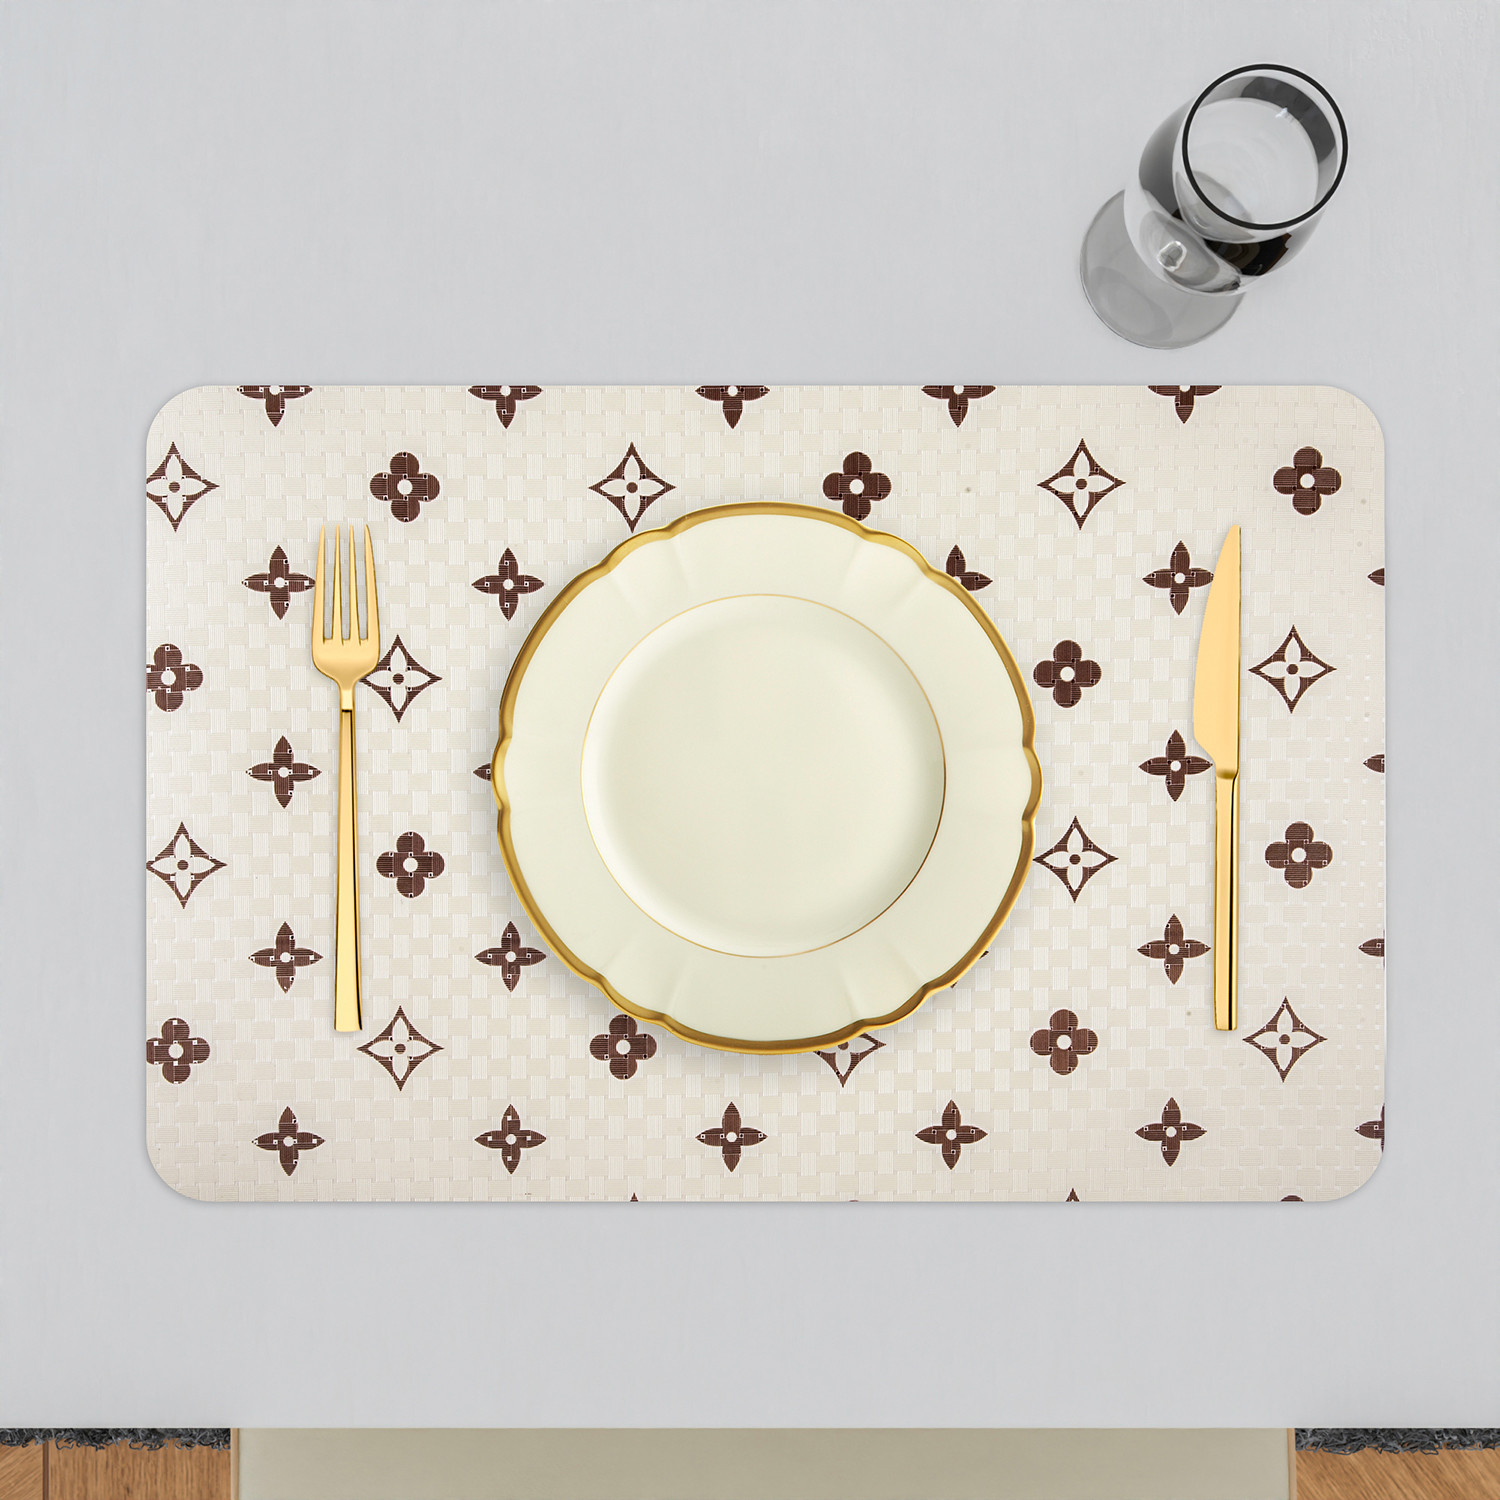 Kuber Industries Placemat | Placemats for Dining Room | Anti-Slip Table Mat Set | Placemats for Kitchen Table | Dining Table Placemats | Brown Star-Design Placemat | 6 Piece Set | Cream